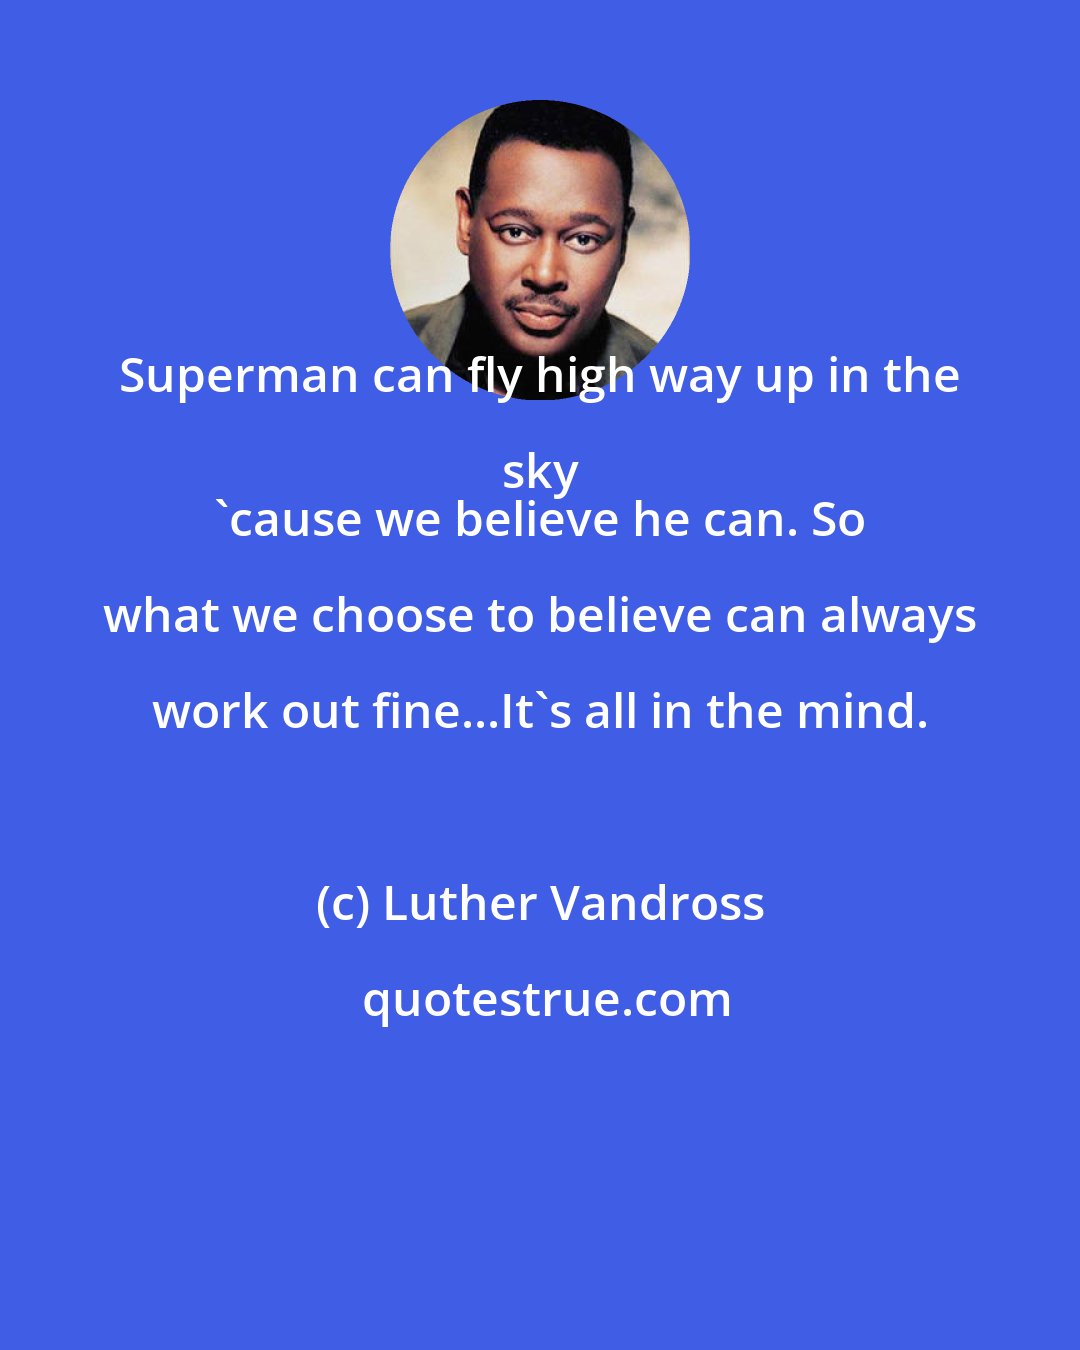 Luther Vandross: Superman can fly high way up in the sky 
 'cause we believe he can. So what we choose to believe can always work out fine...It's all in the mind.